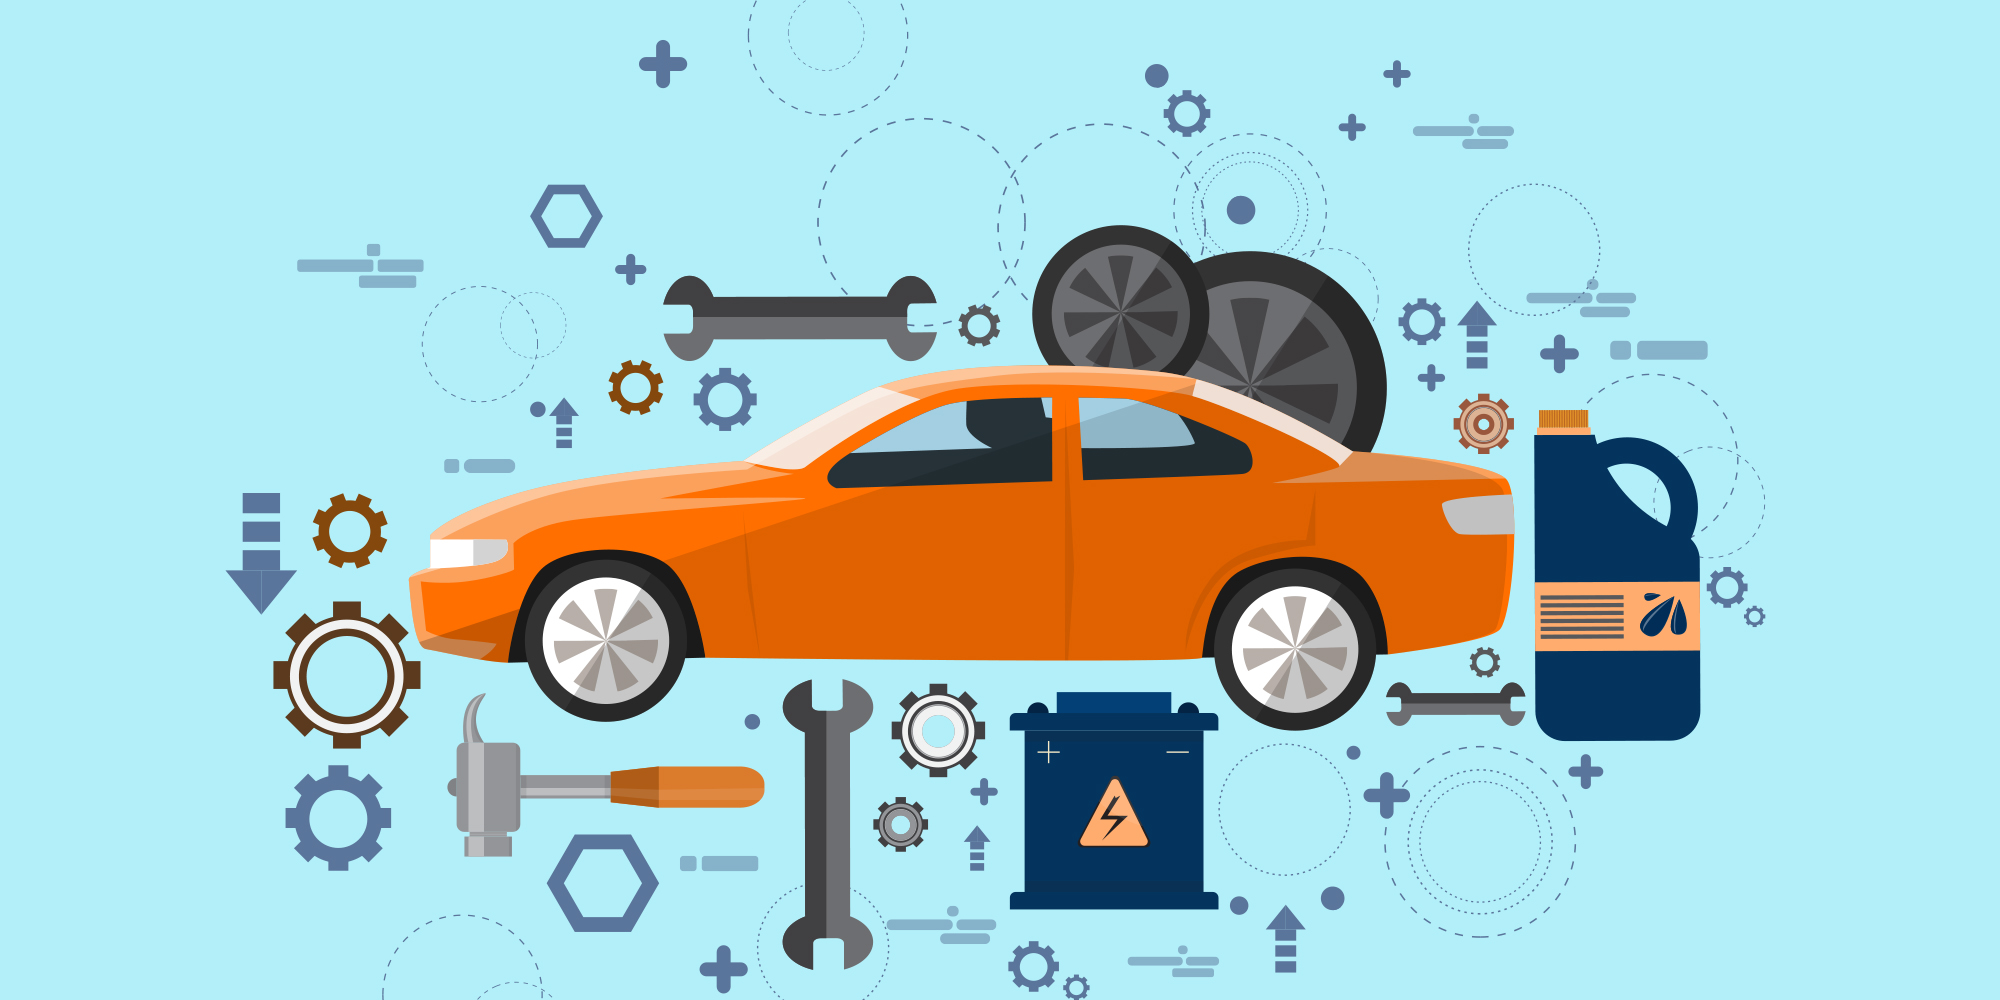 5 Smart Ways to Reduce Your Car Maintenance Costs - 2021 Guide